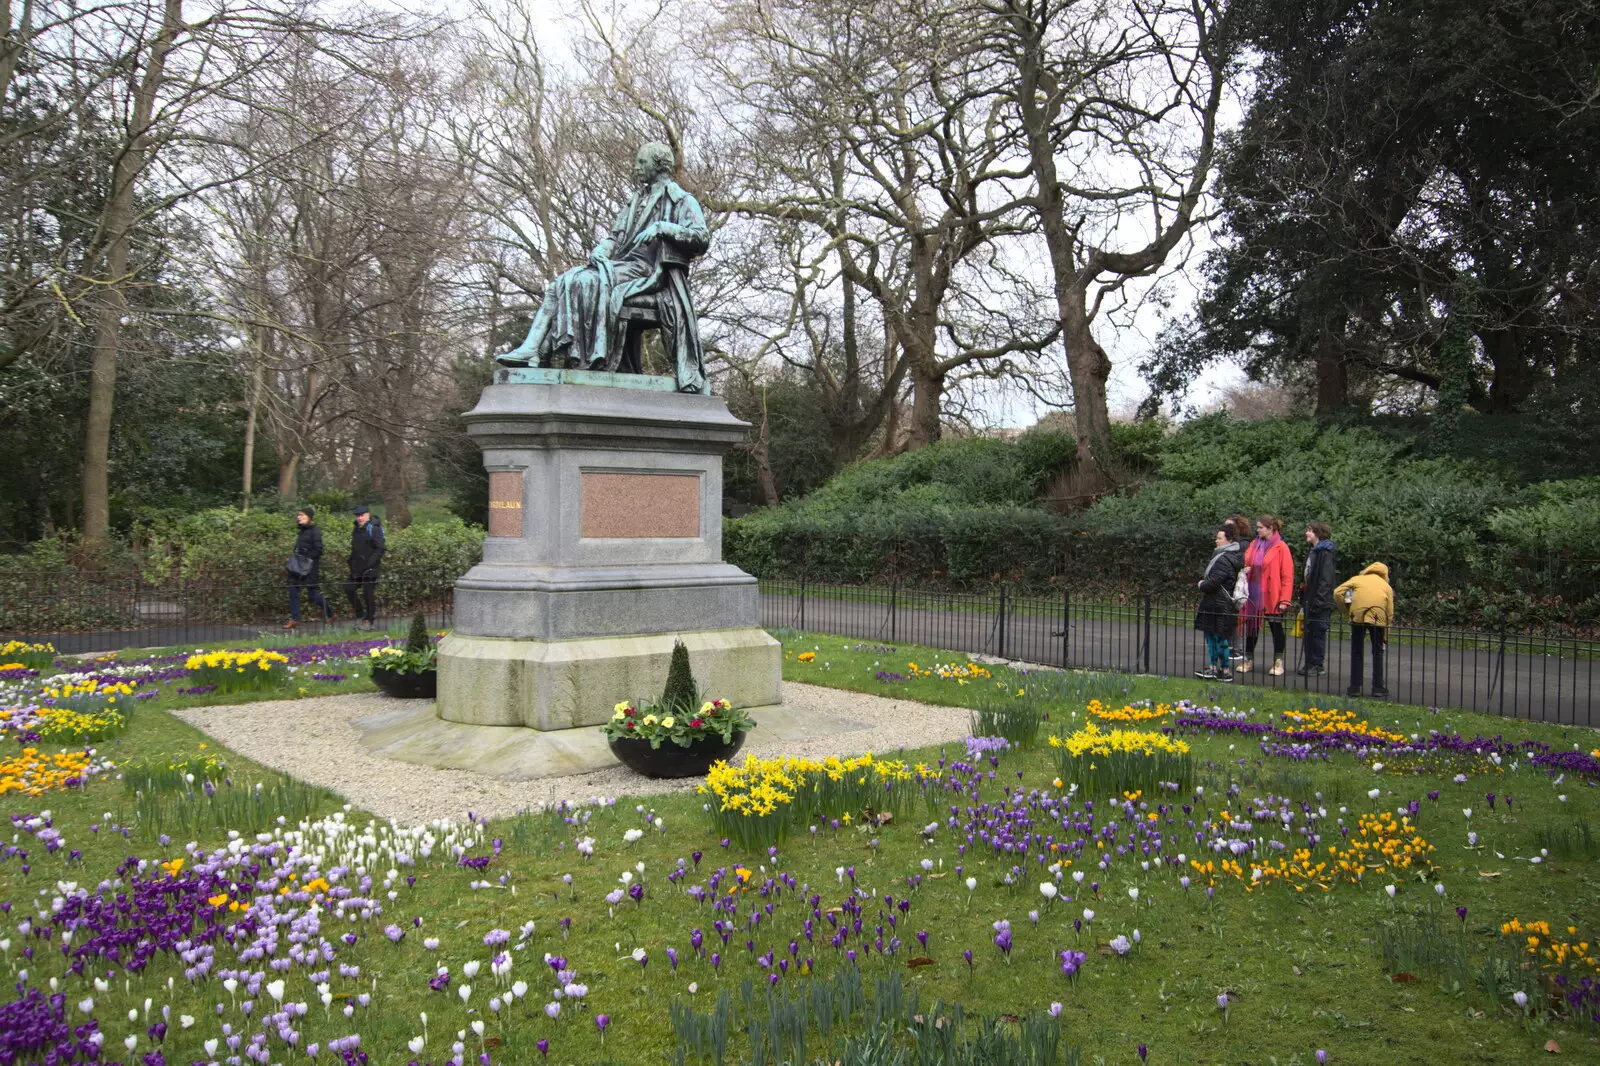 Crocii are out in the park, from The Dead Zoo, Dublin, Ireland - 17th February 2023